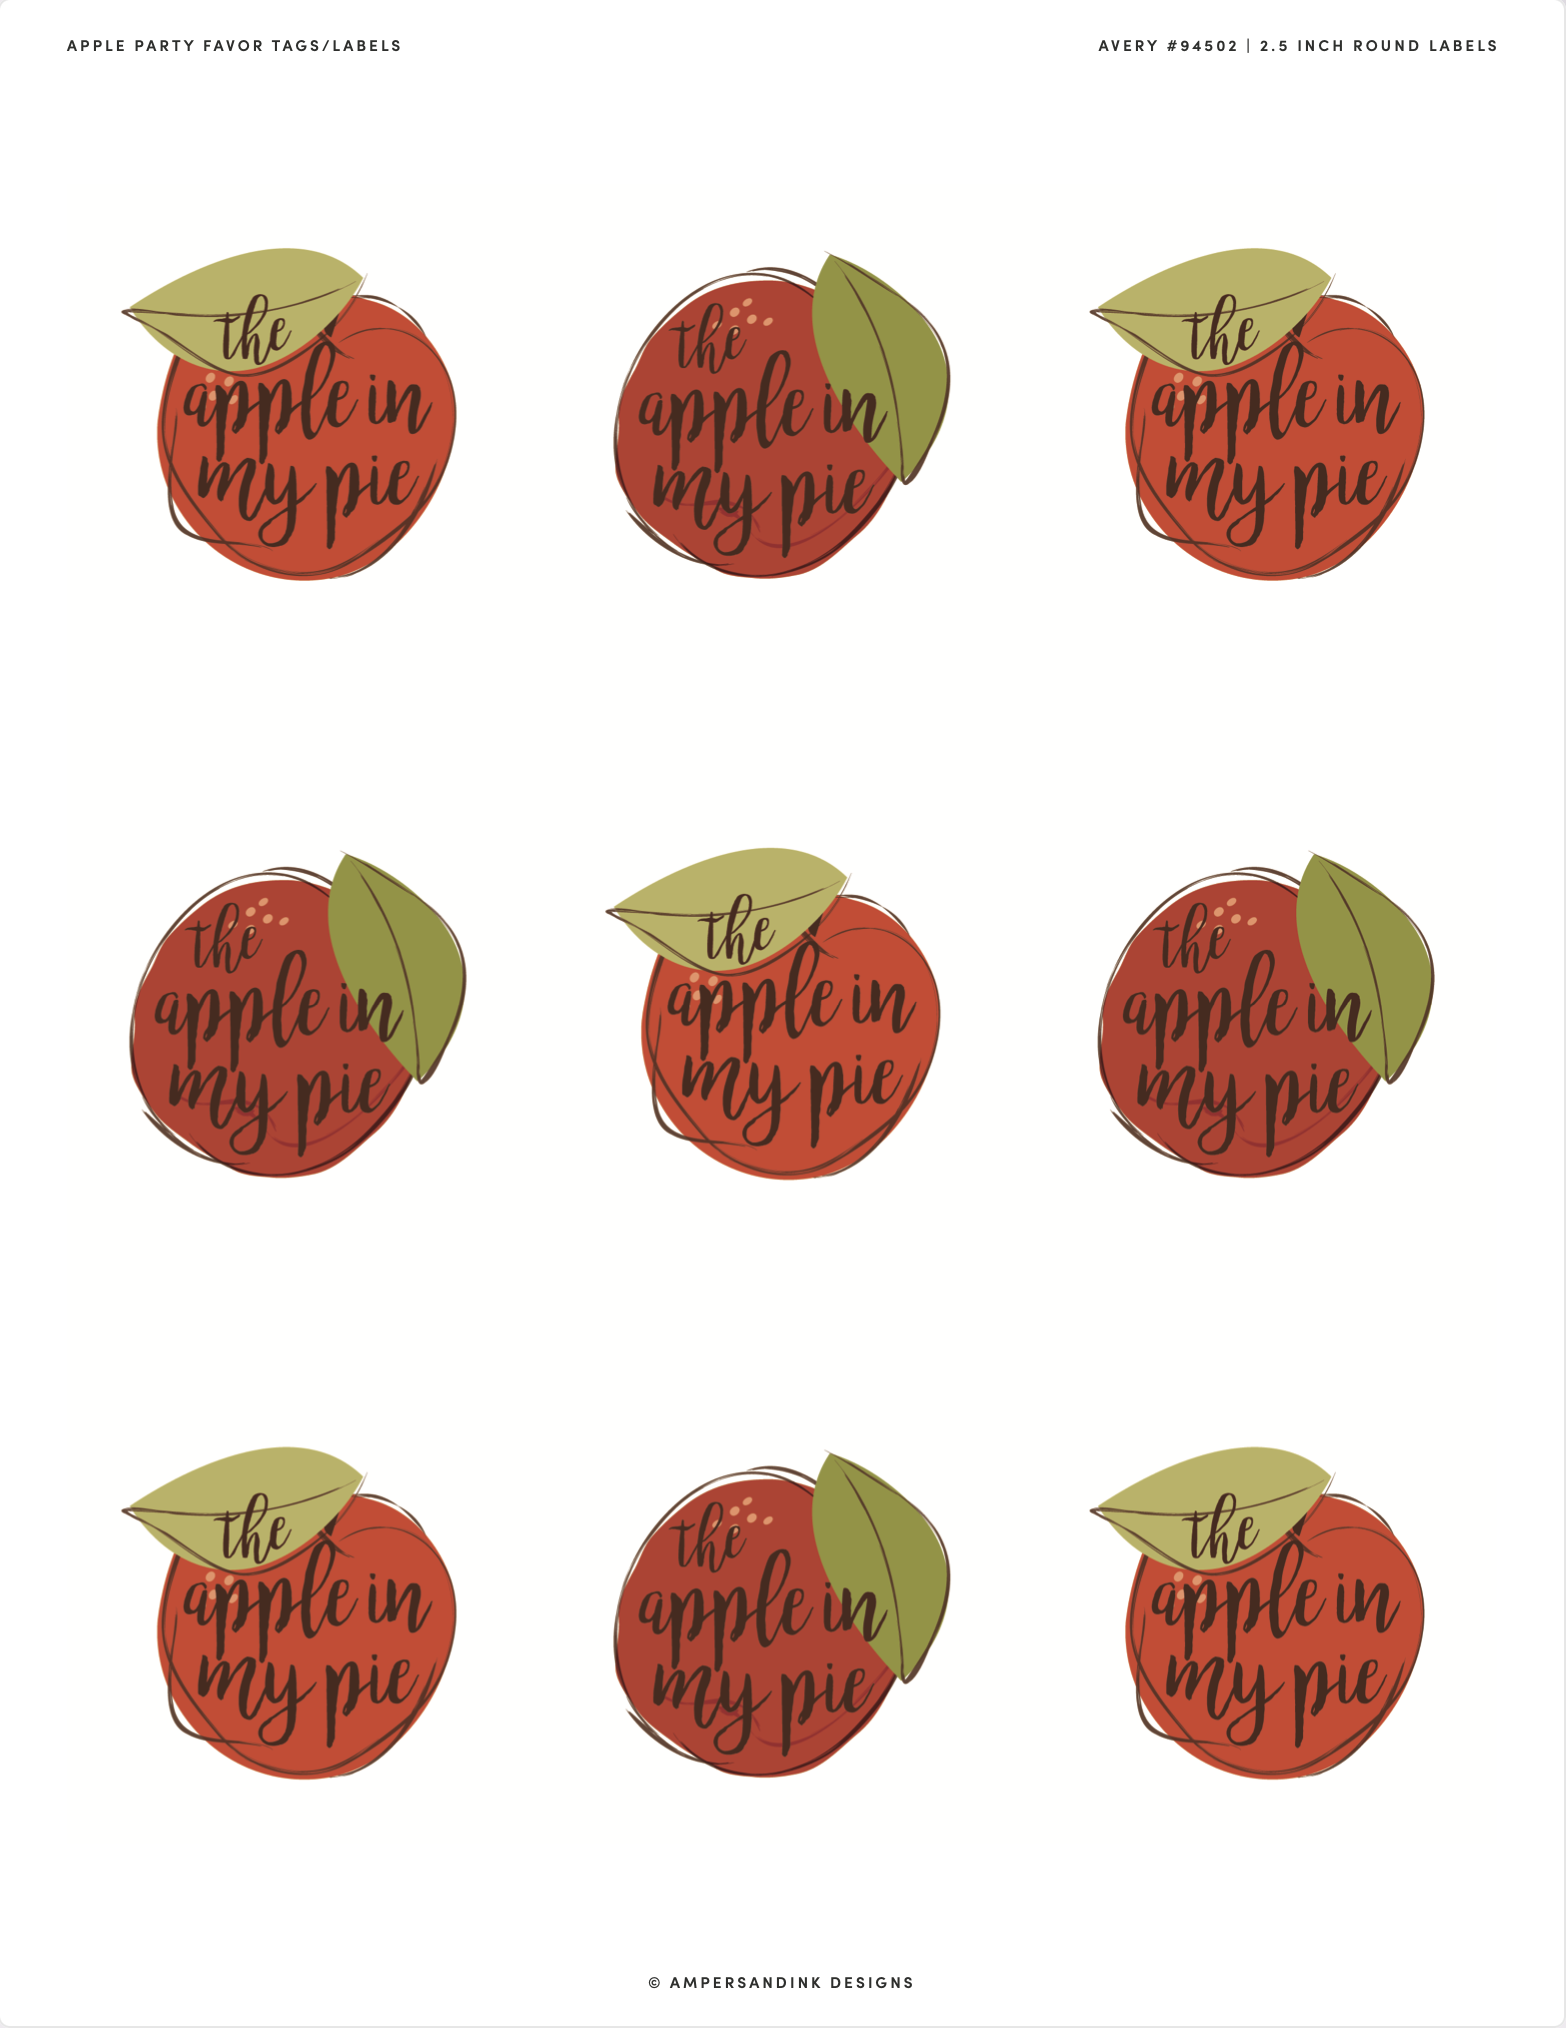 The Apple in My Pie

PLUS: Printable Favor Tags/Labels